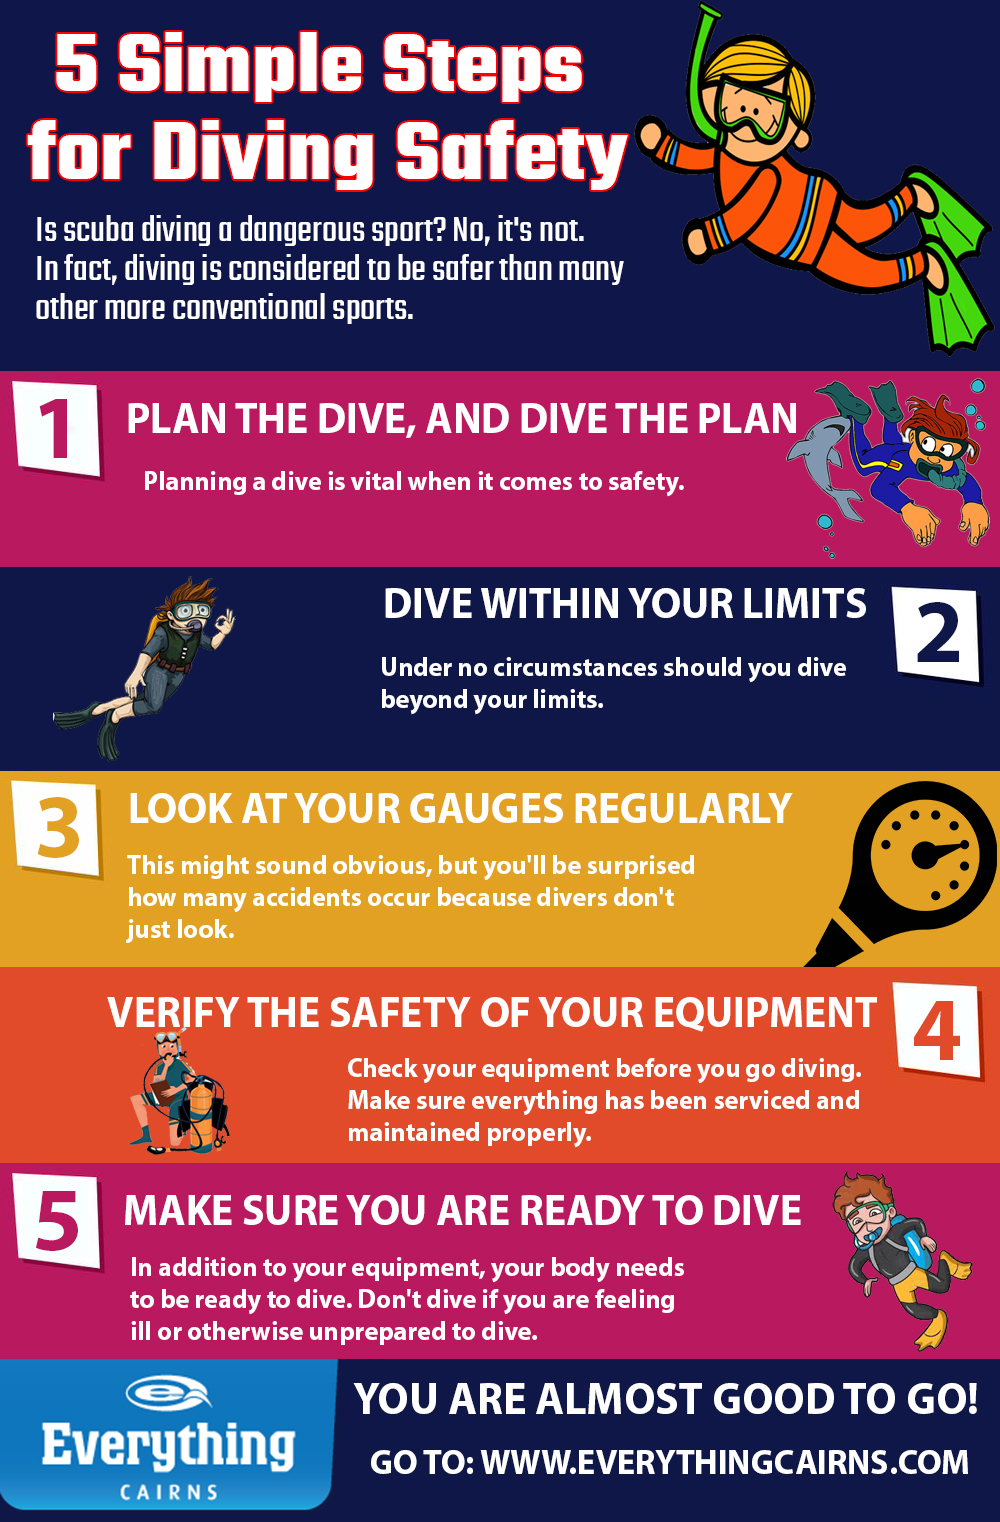 5 Simple Steps for Diving Safety